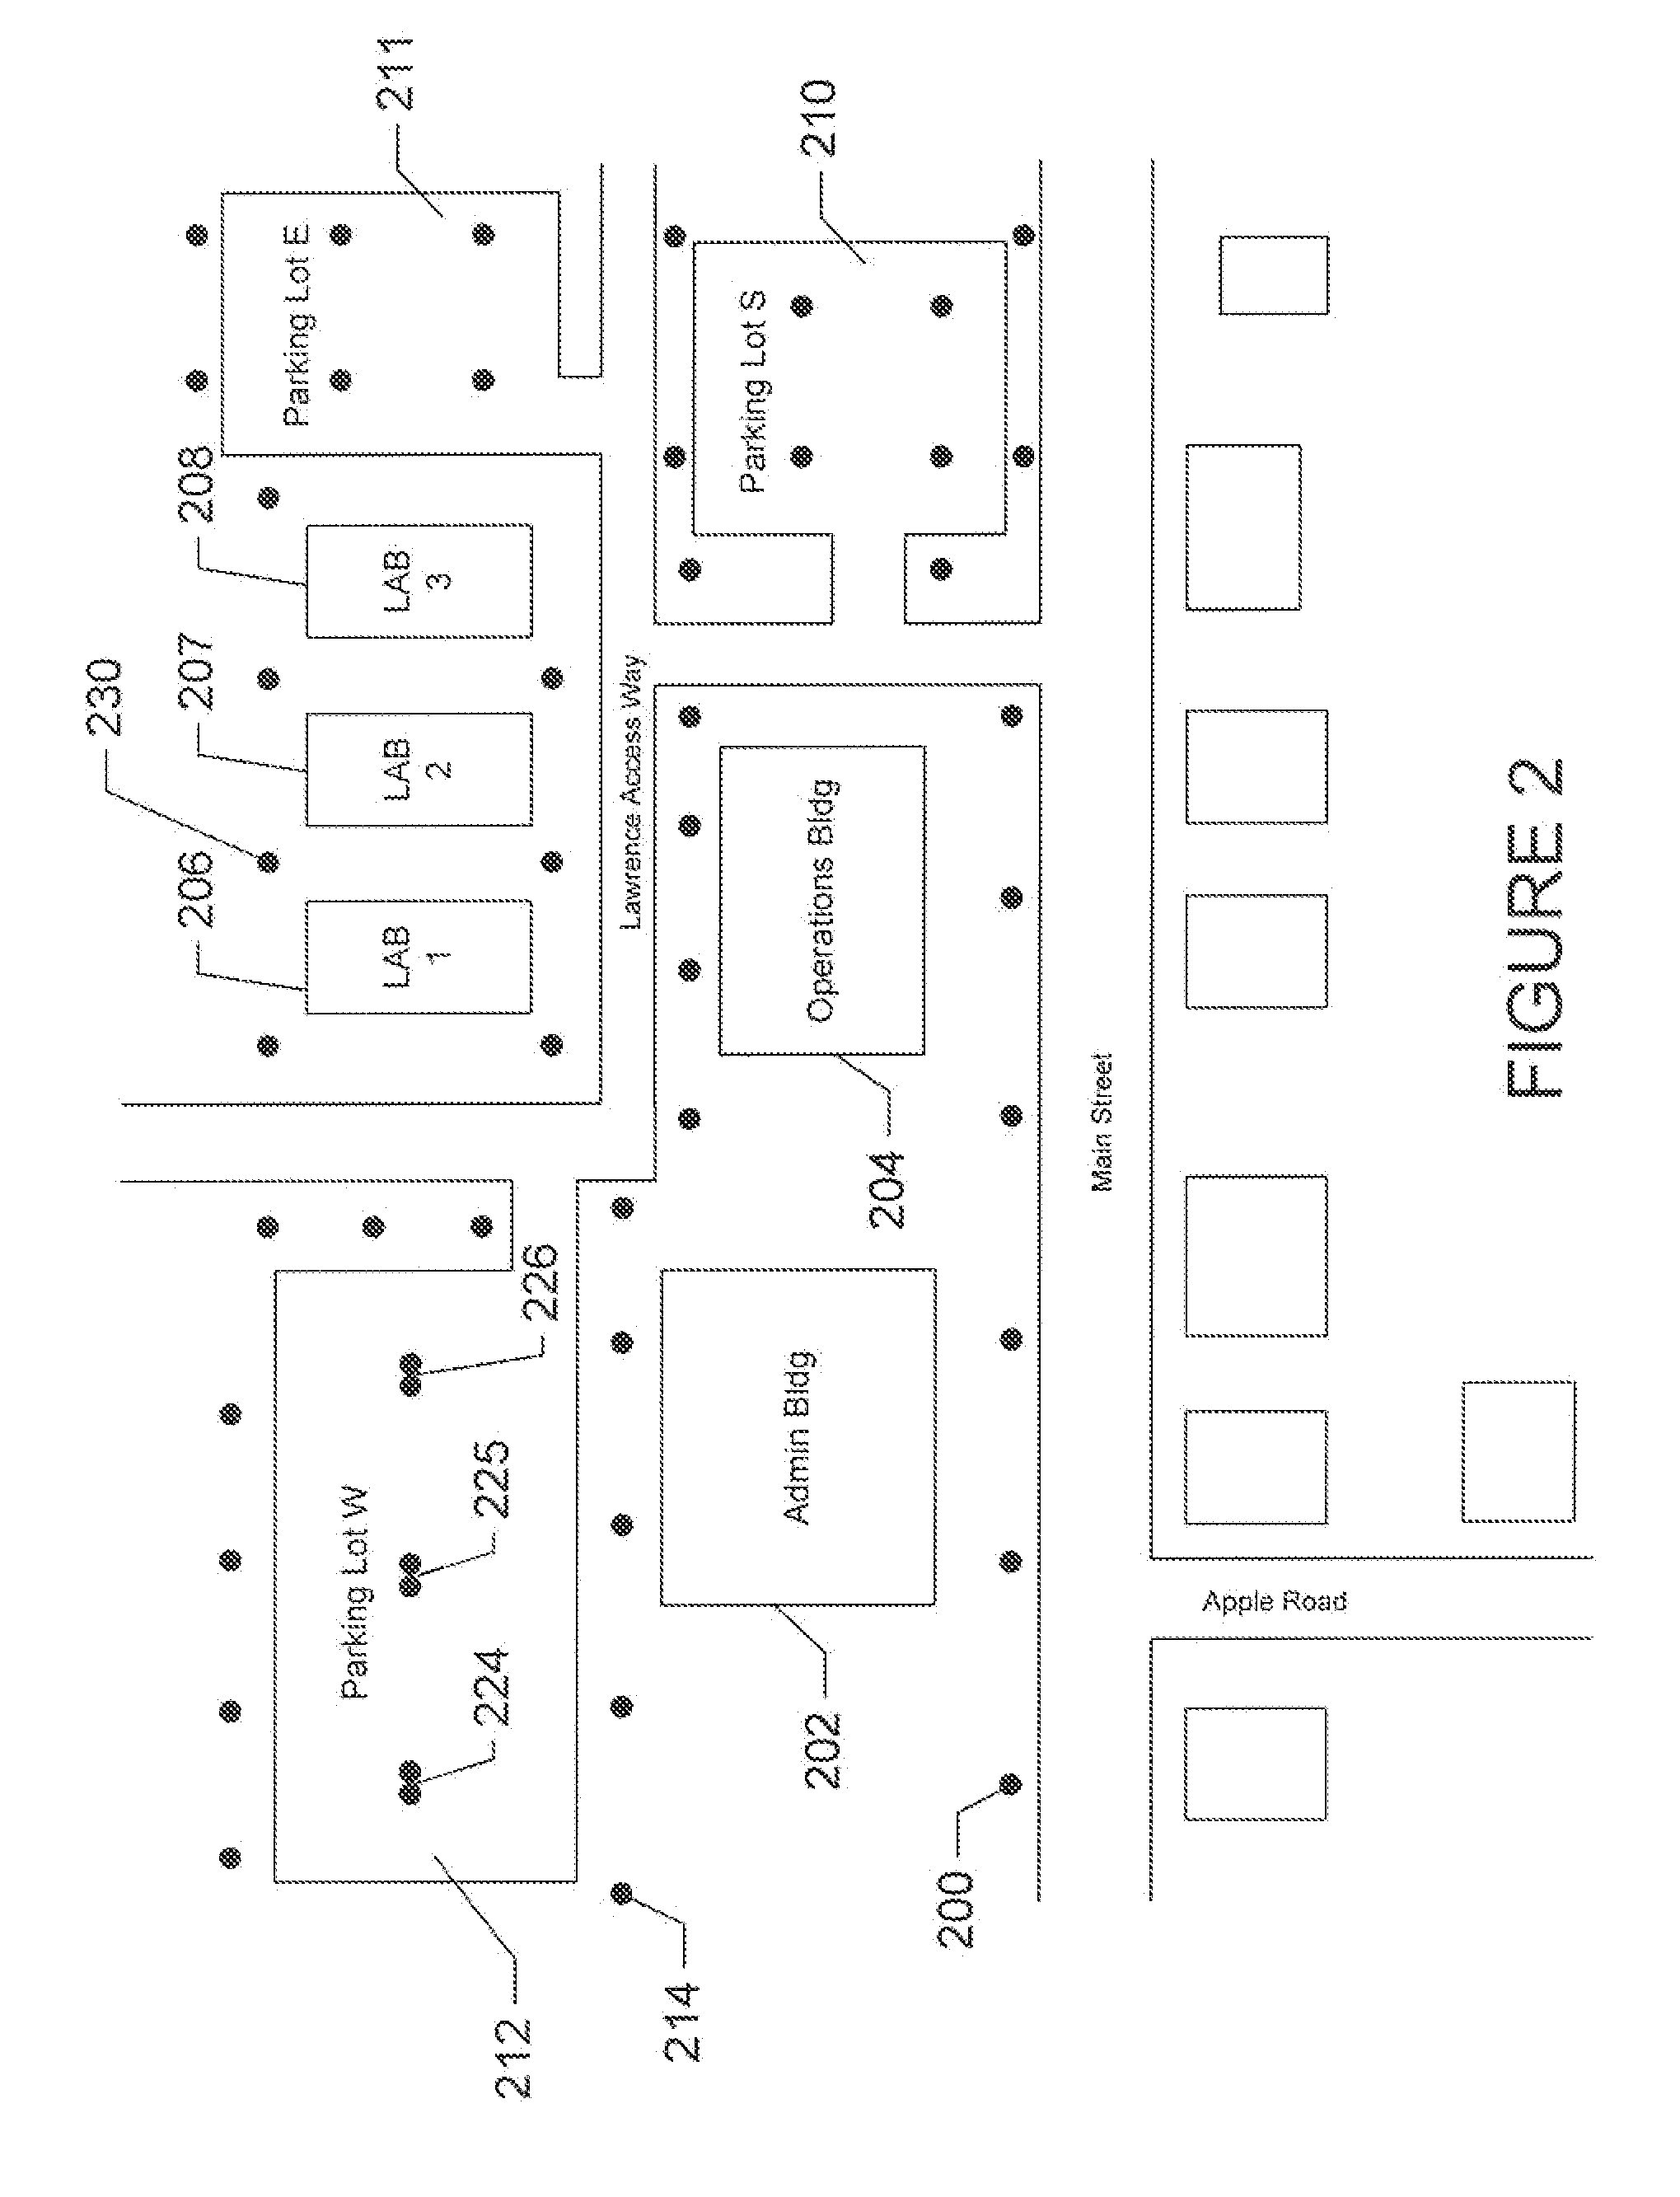 Method and system for lighting control and monitoring